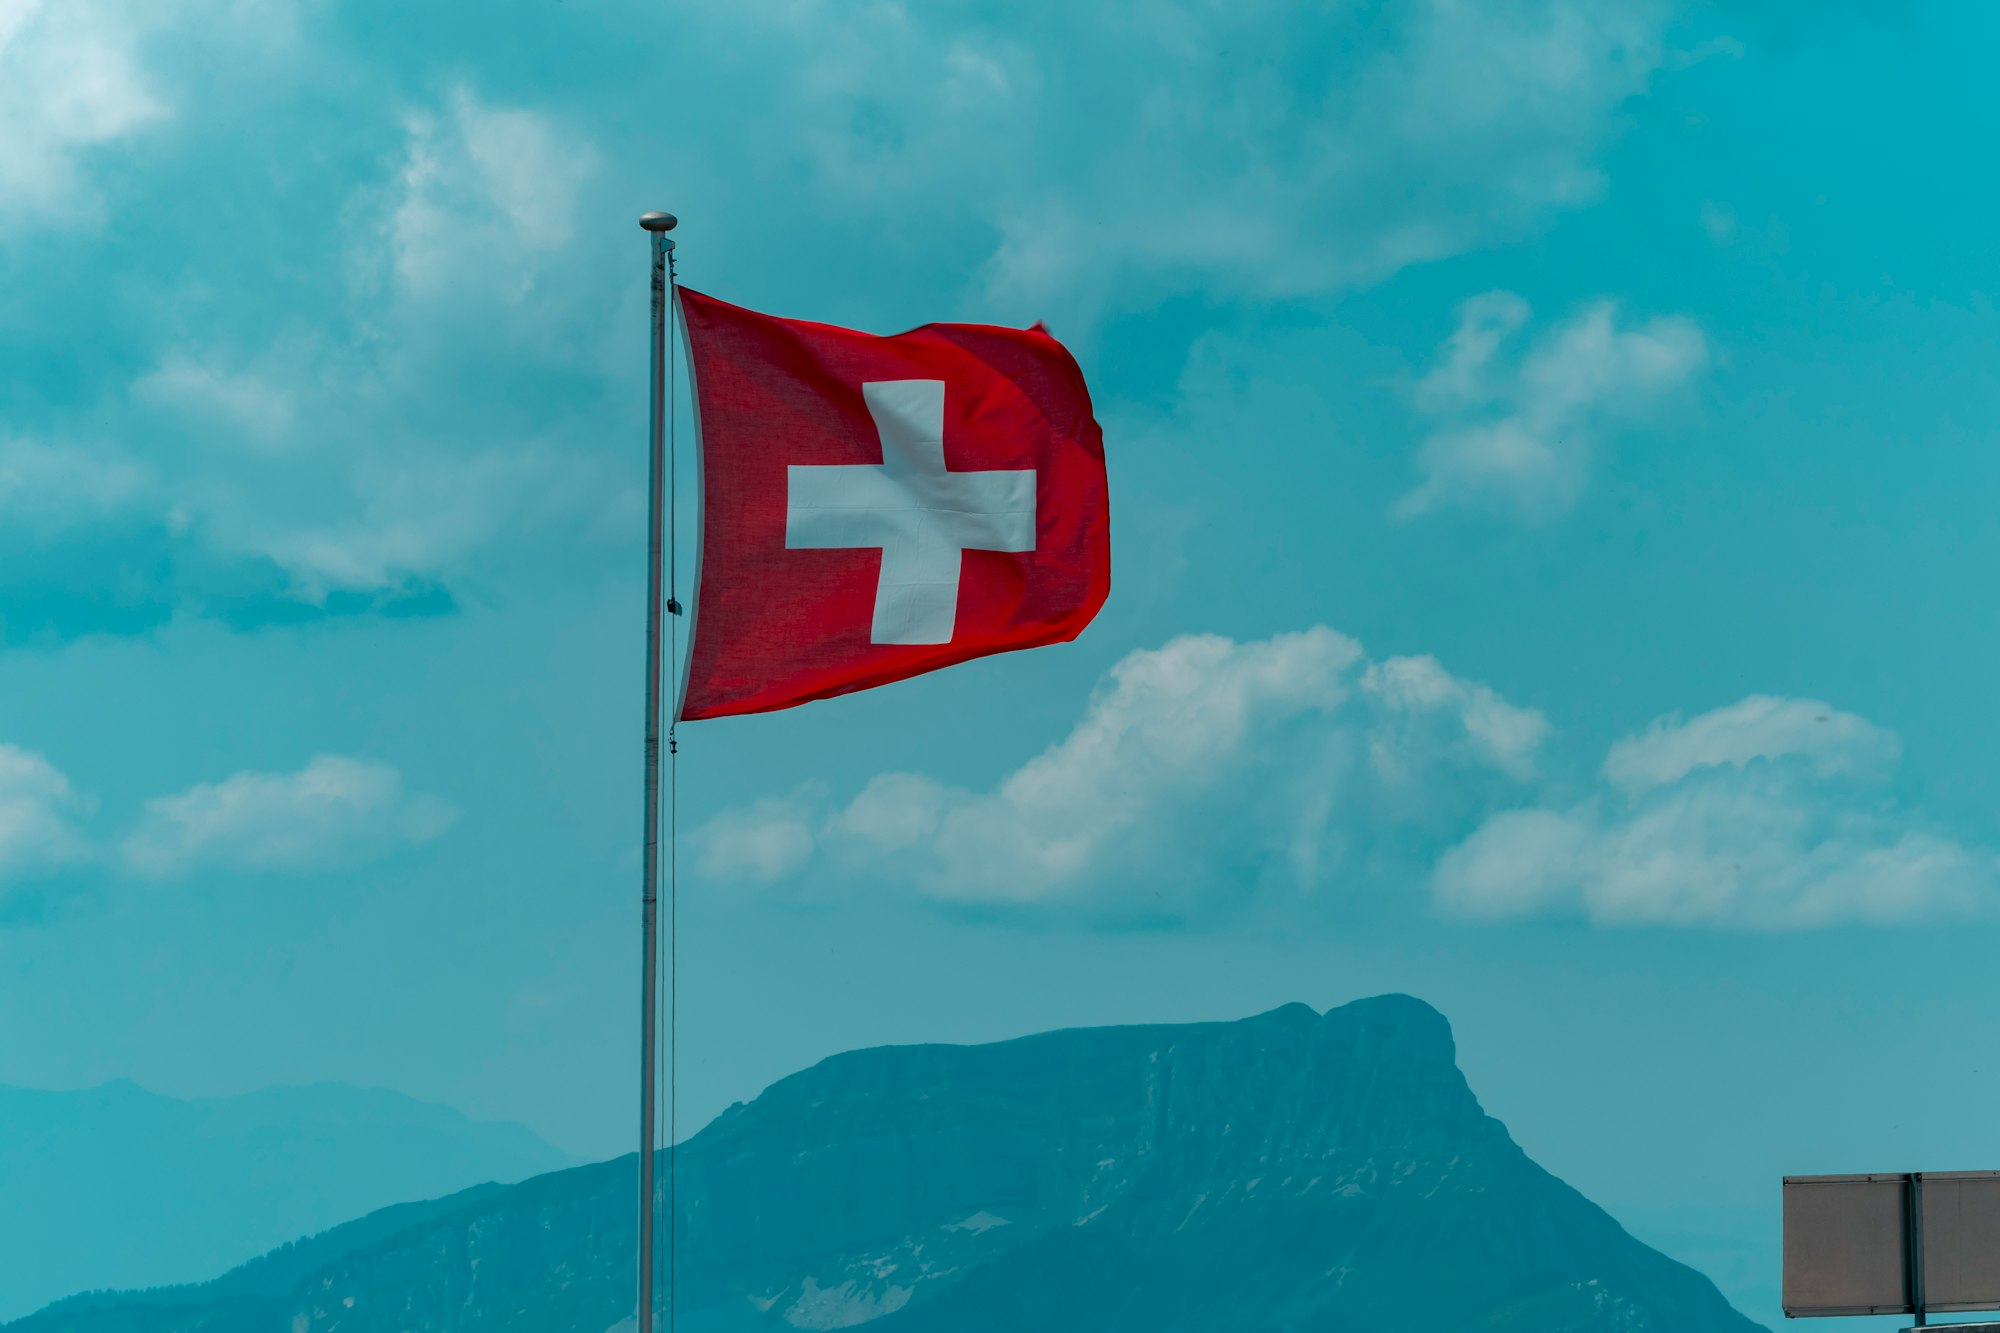 The Swiss Foundation is dead. Long live the Swiss Association - now onchain on OtoCo!